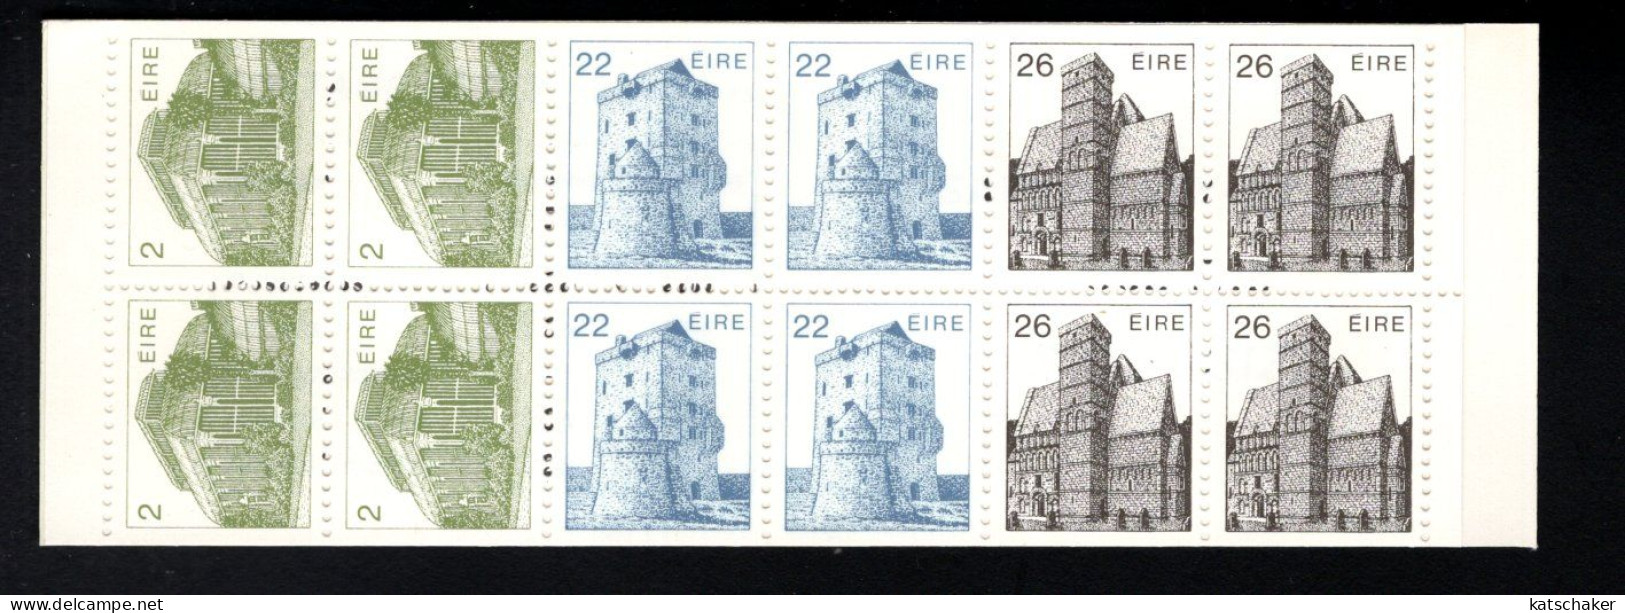 1999617407 1982  SCOTT 550B (XX) POSTFRIS  MINT NEVER HINGED -  BOOKLET PANE ARCHITECTURE TYPE OF 1982 - Unused Stamps